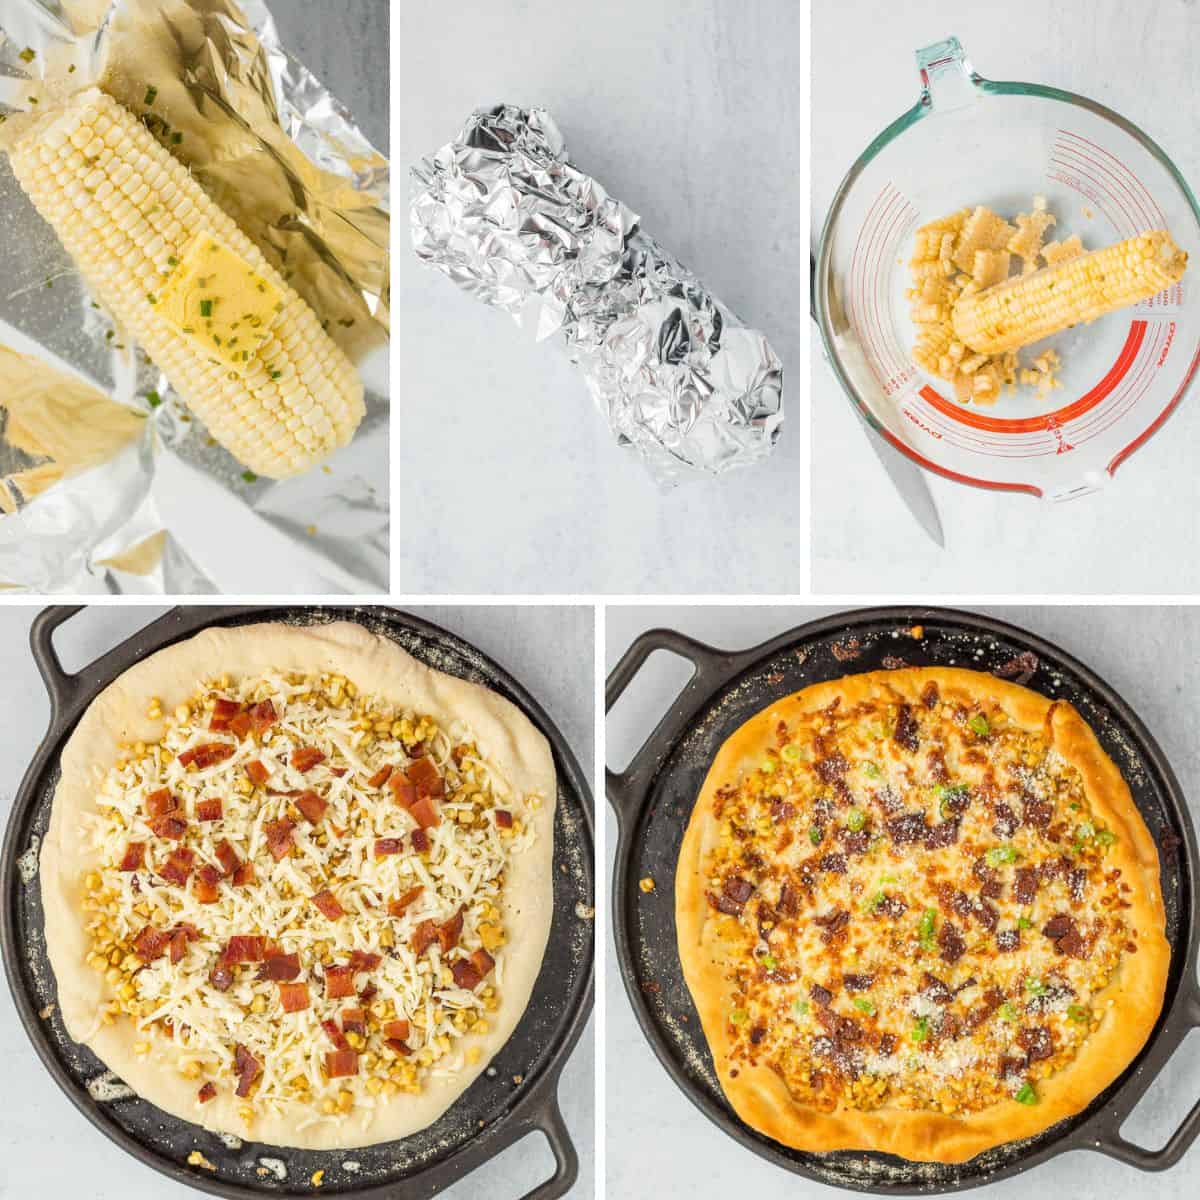 3 photos showing how to roast and cut corn and 2 photos showing how to make corn and bacon pizza on a cast iron pizza pan.